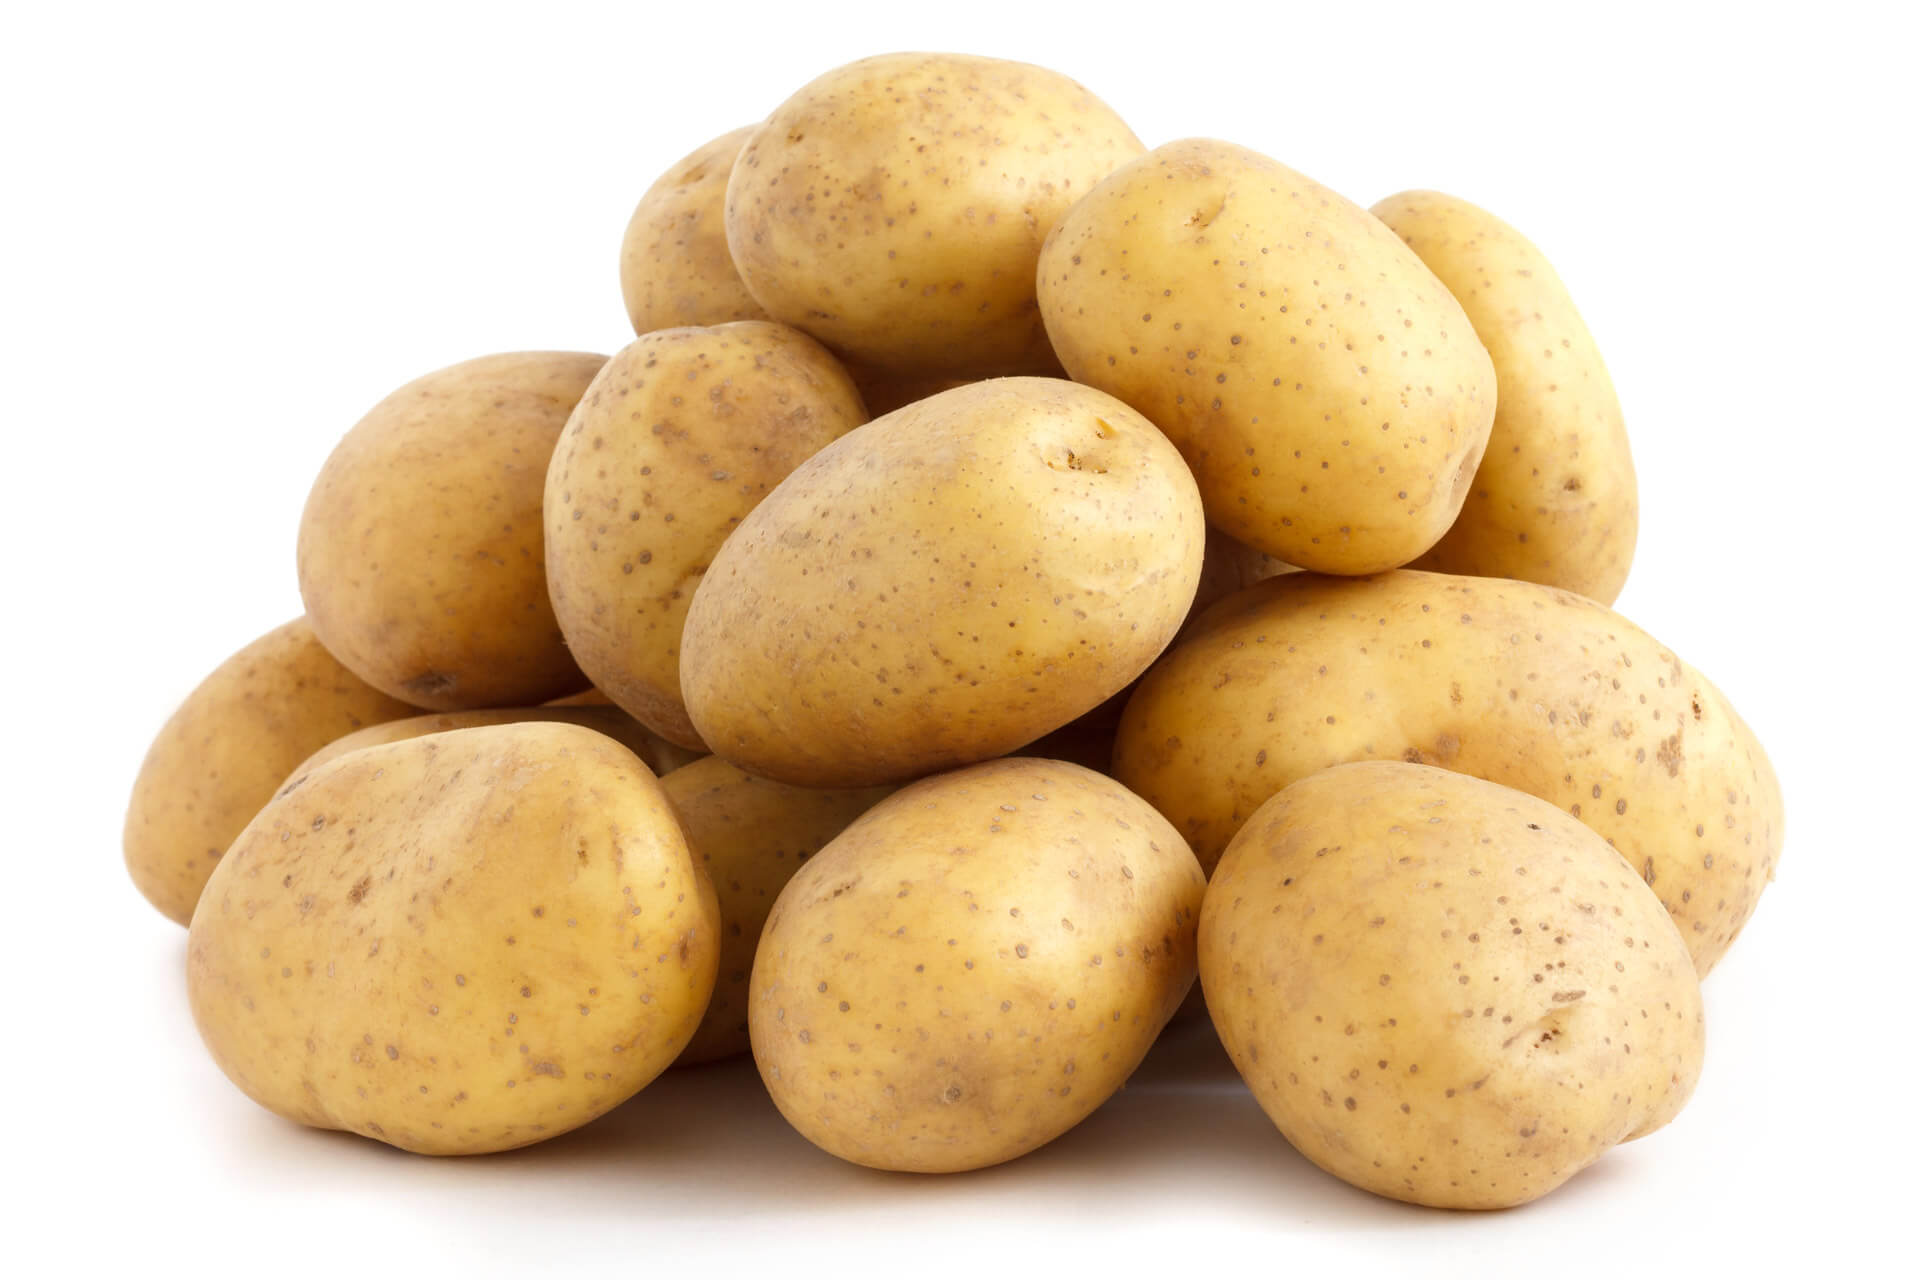 http://www.valleyspuds.com/wp-content/uploads/Valley-Spuds-Pile-of-White-Potatoes.jpg